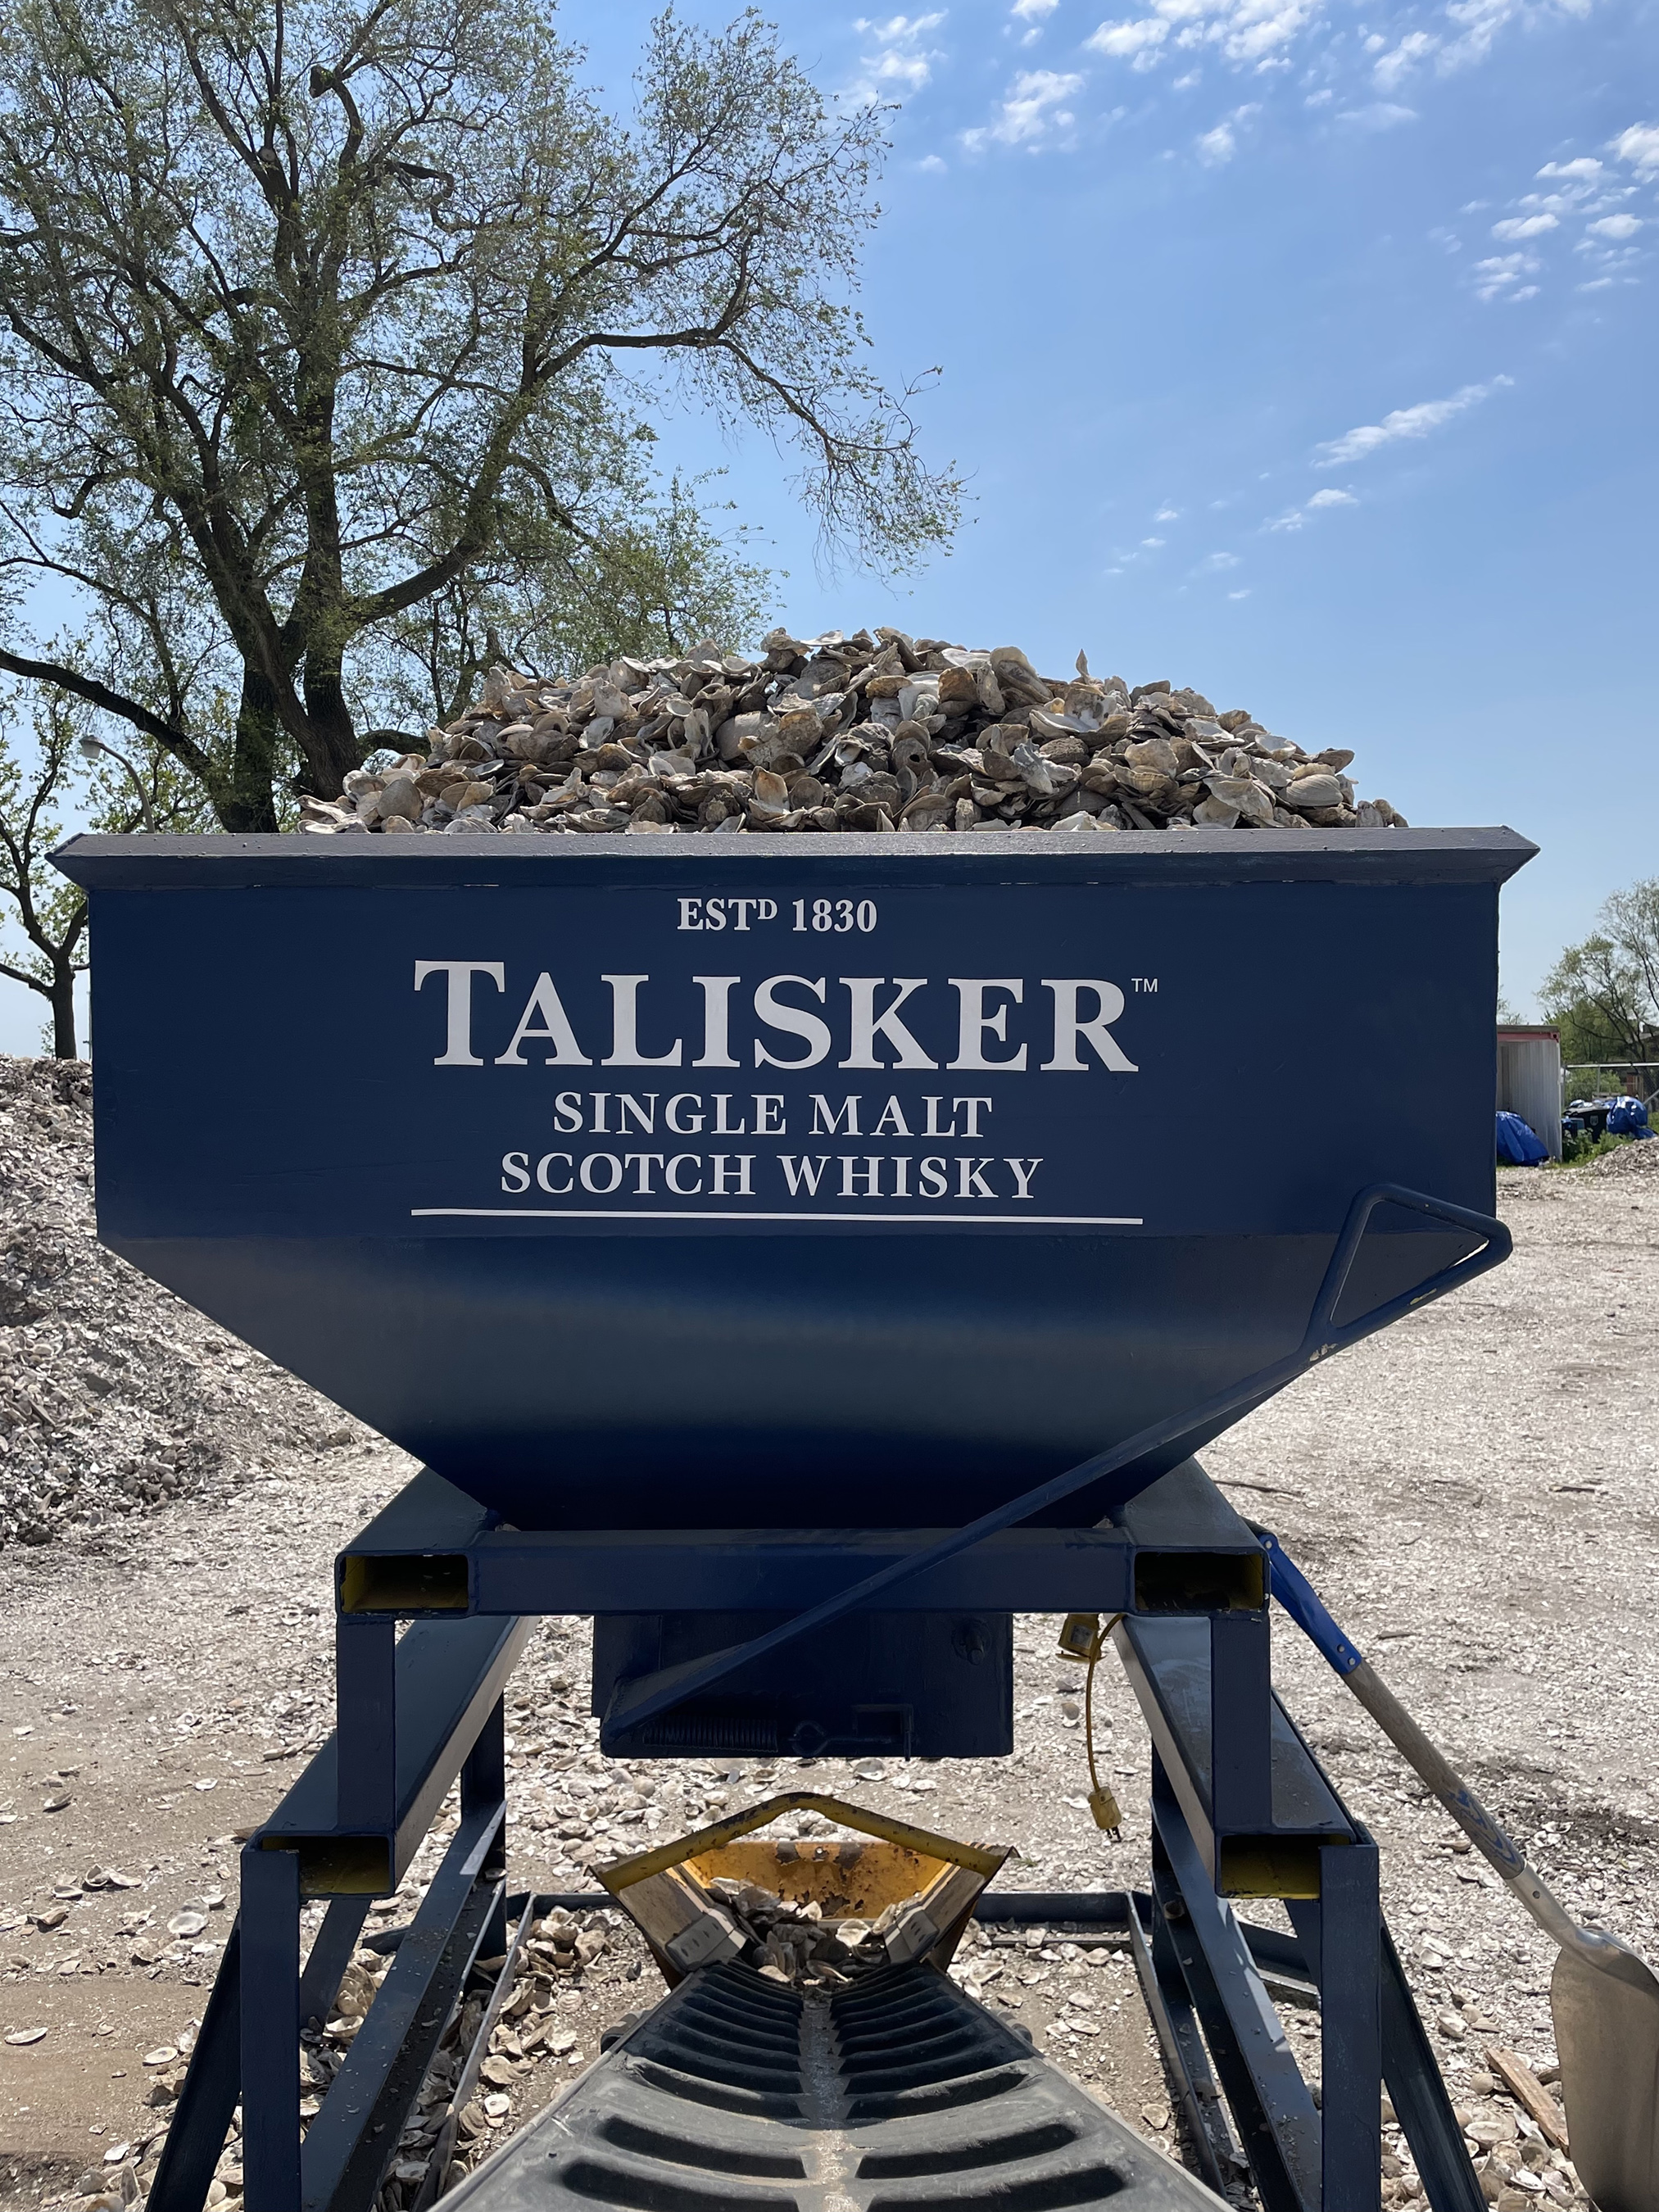 This 'hopper' can be found on Governor's Island, the home of Billion Oyster Project. It helps fill bags with used oyster shells that have been collected from the Shell Collection Program, of which Talisker Single Malt Scotch Whisky is the lead sponsor.